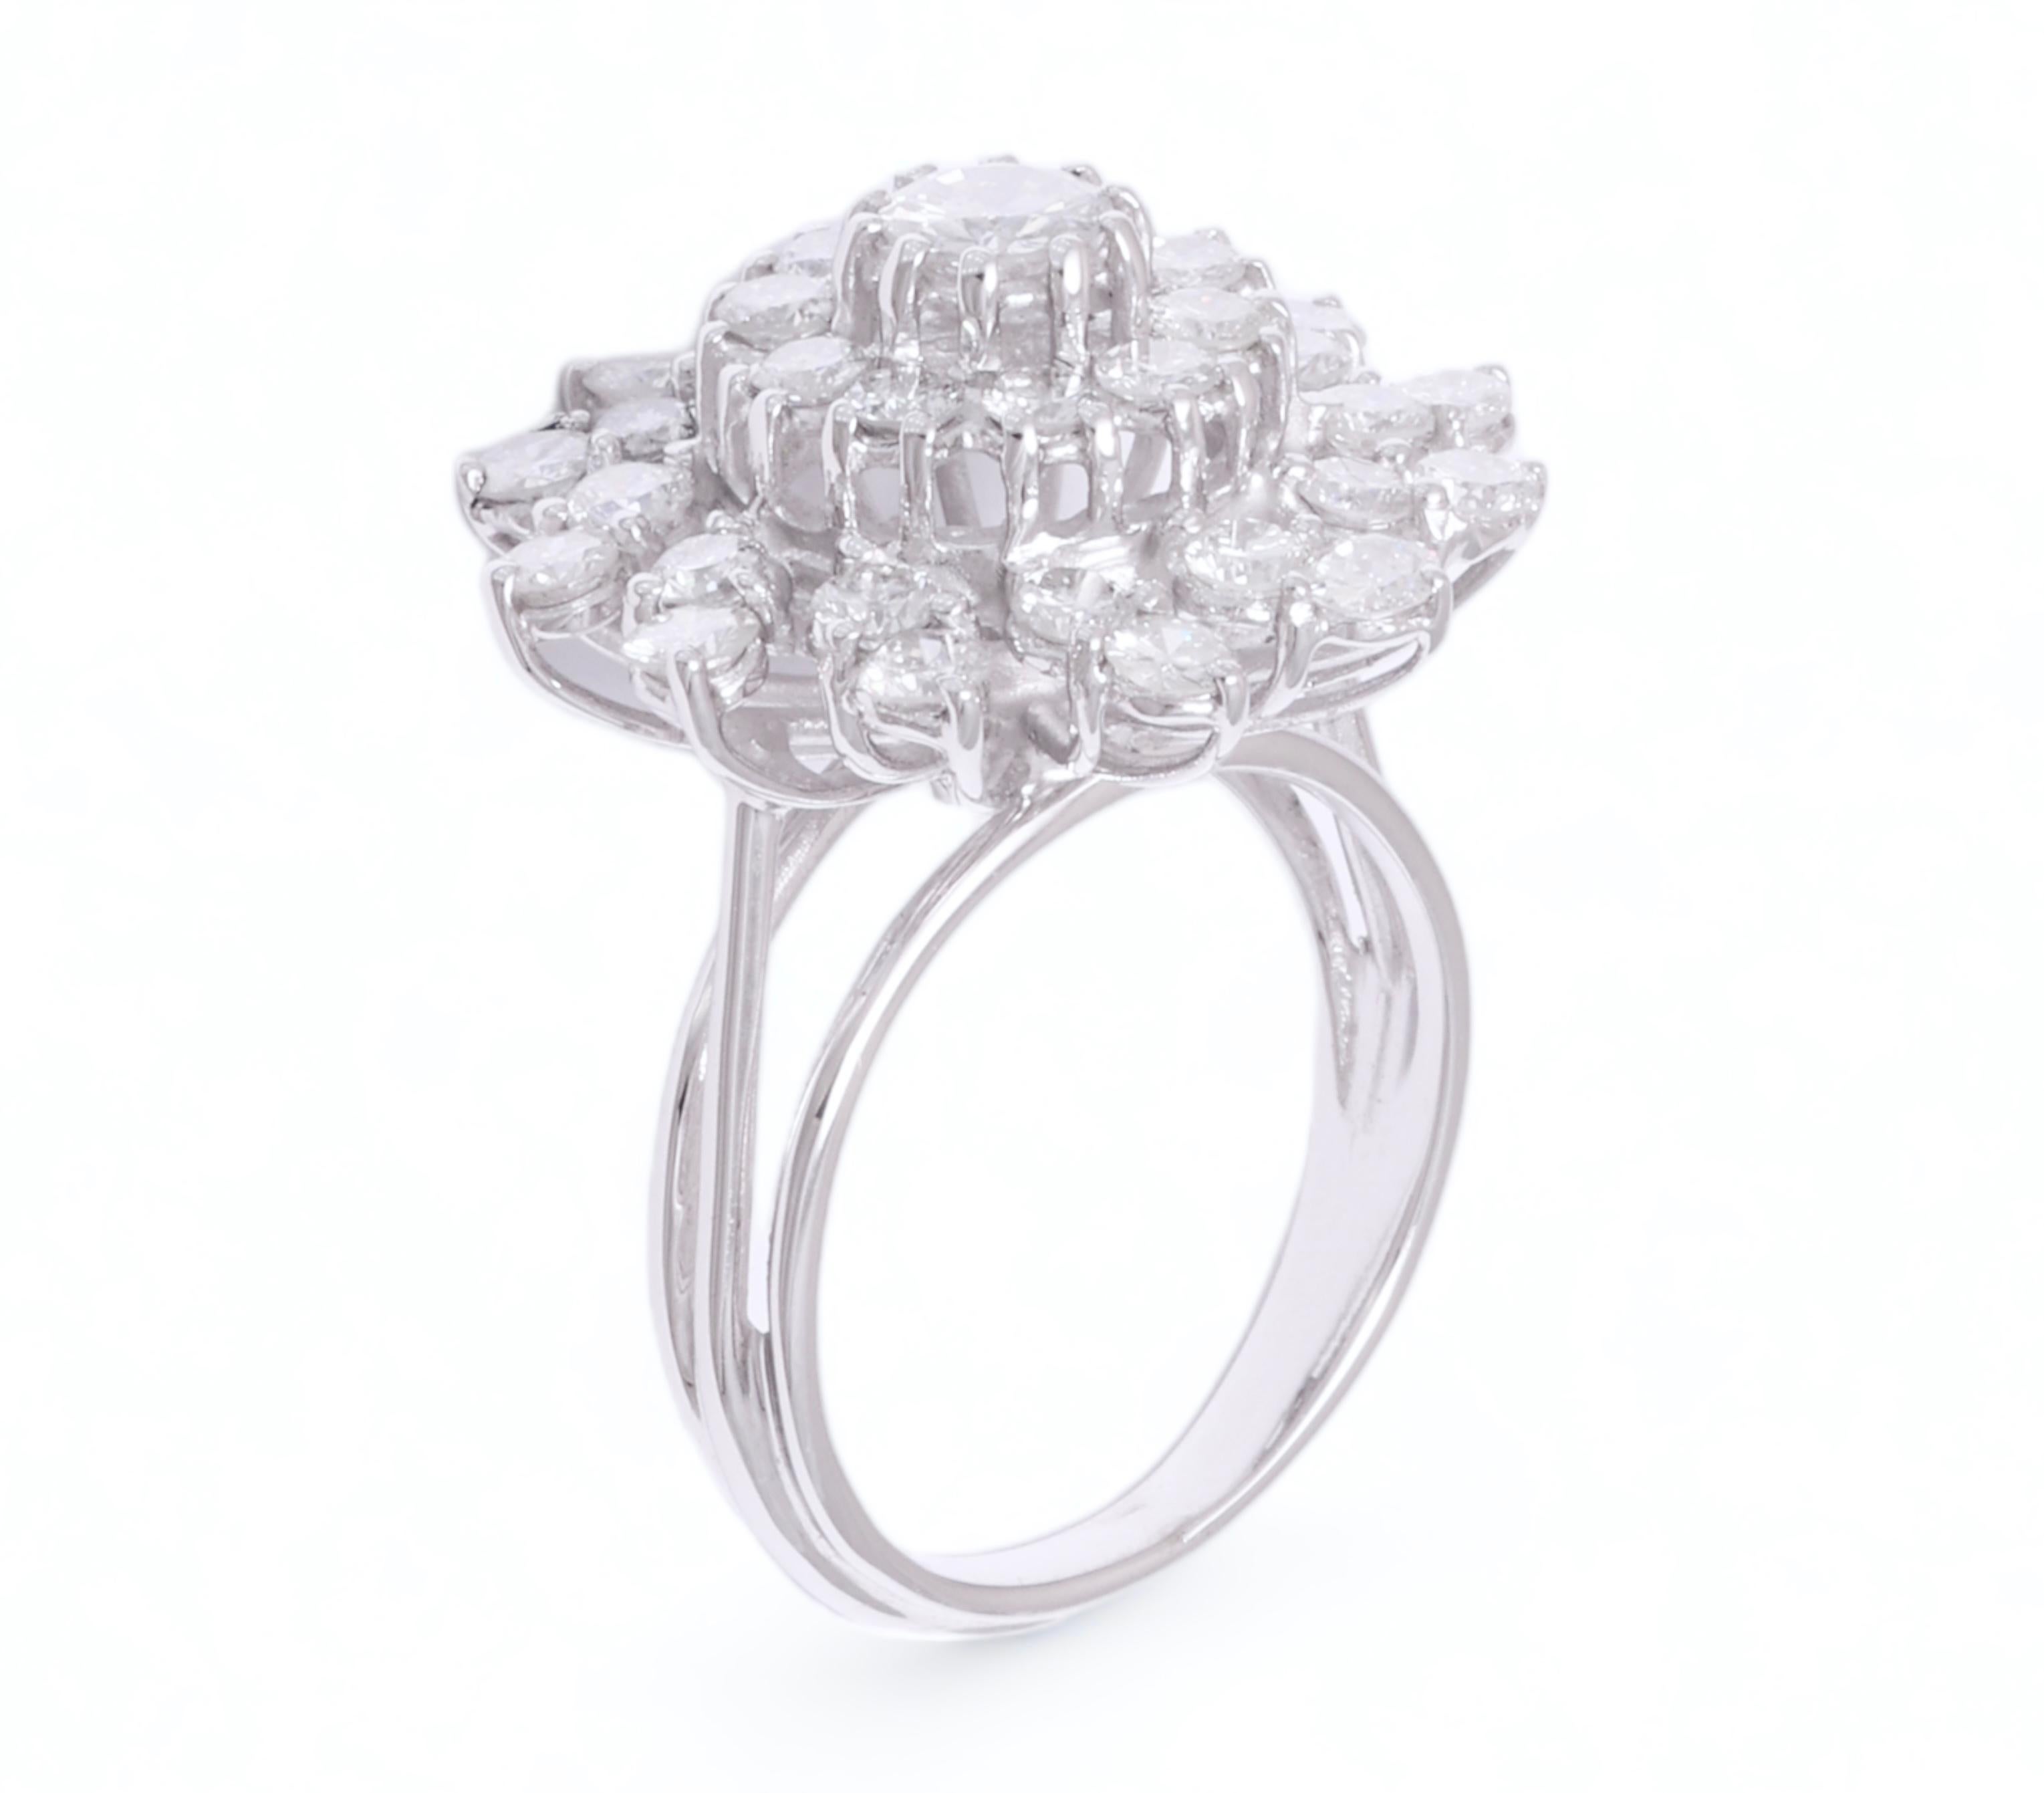 18 kt. White Gold Flower Ring  With 2.85 ct. Diamonds  For Sale 3